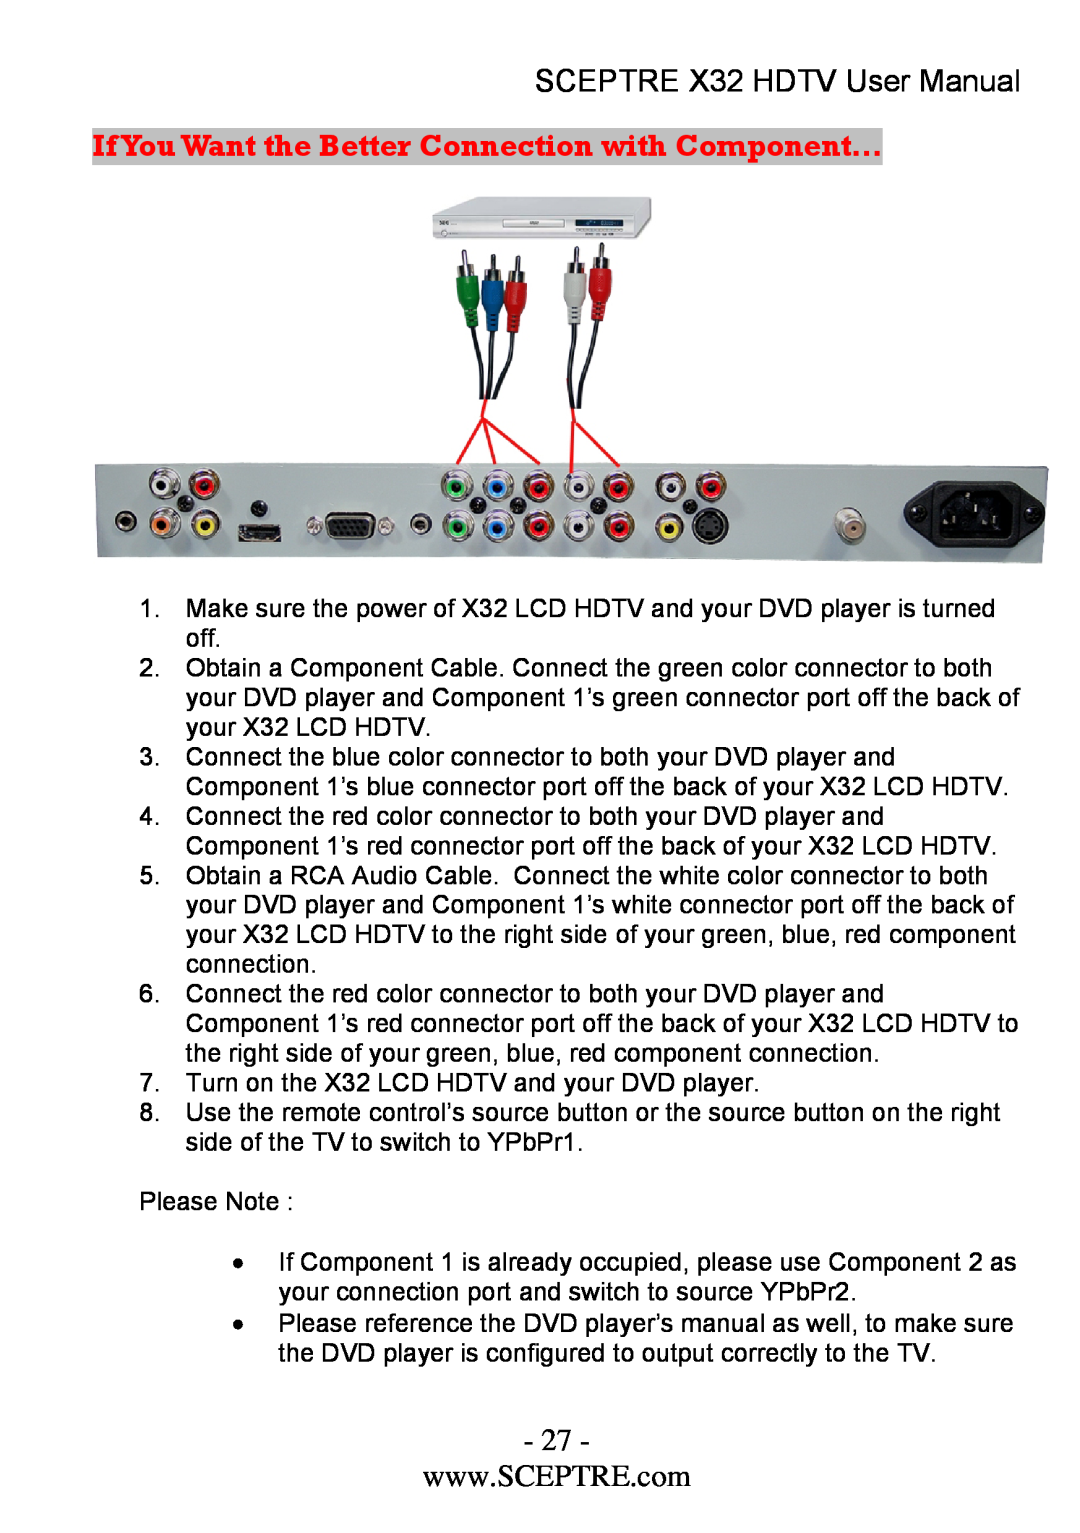 Sceptre Technologies x32 user manual If You Want the Better Connection with Component…, SCEPTRE X32 HDTV User Manual 